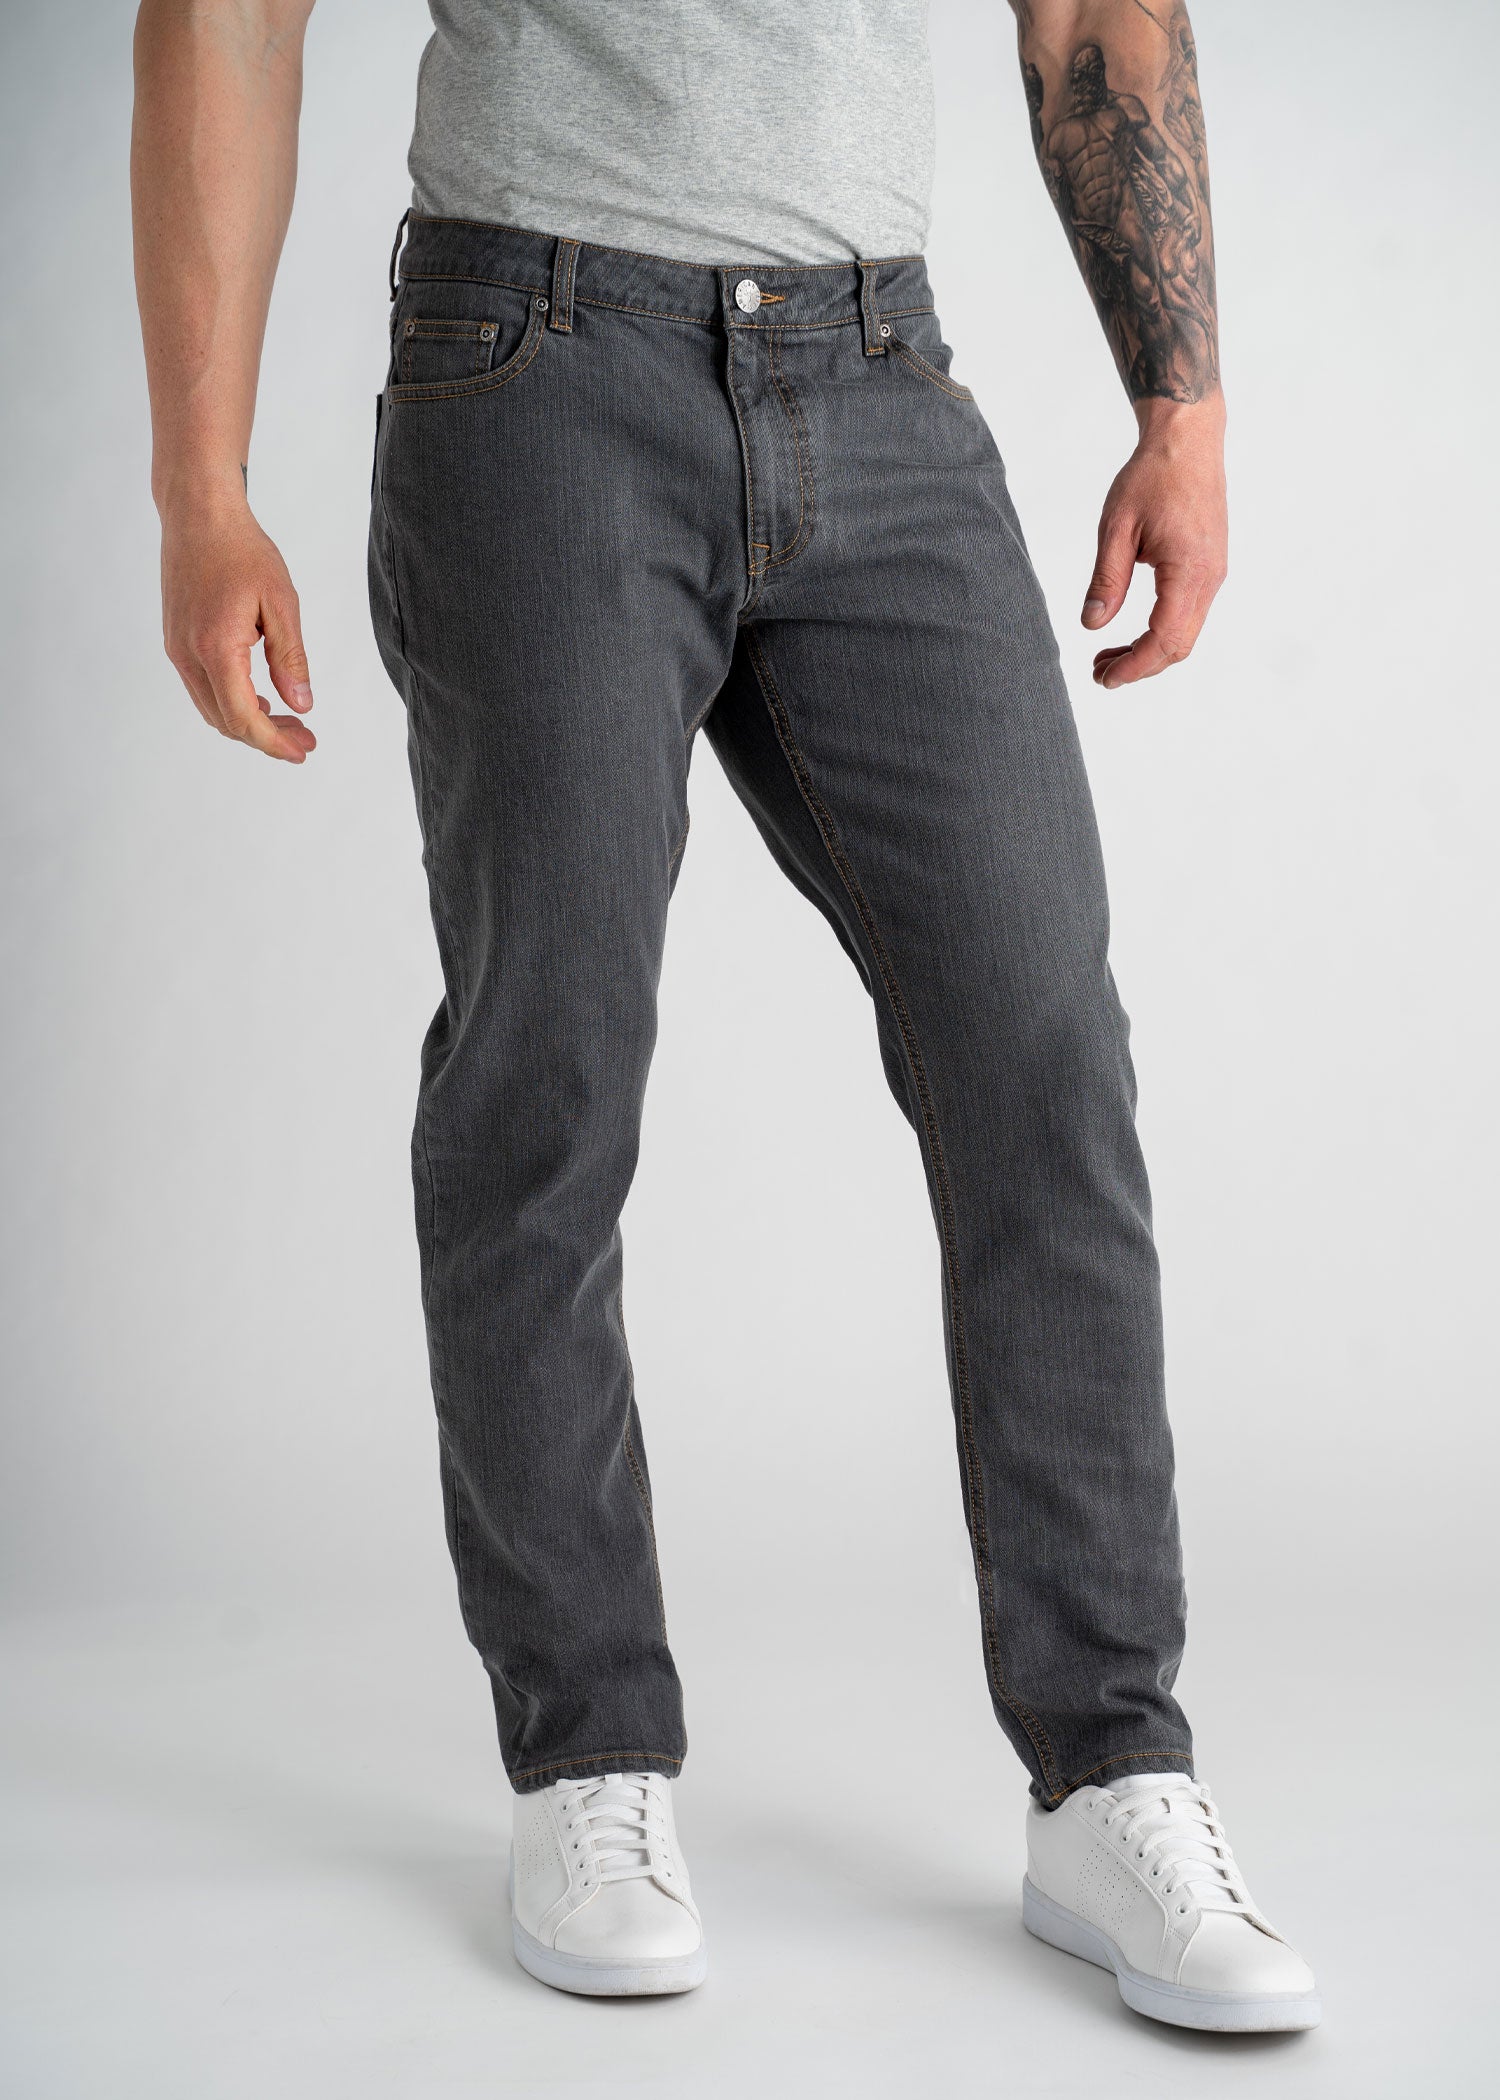 Carman Tapered Jeans For Tall Men California Blue